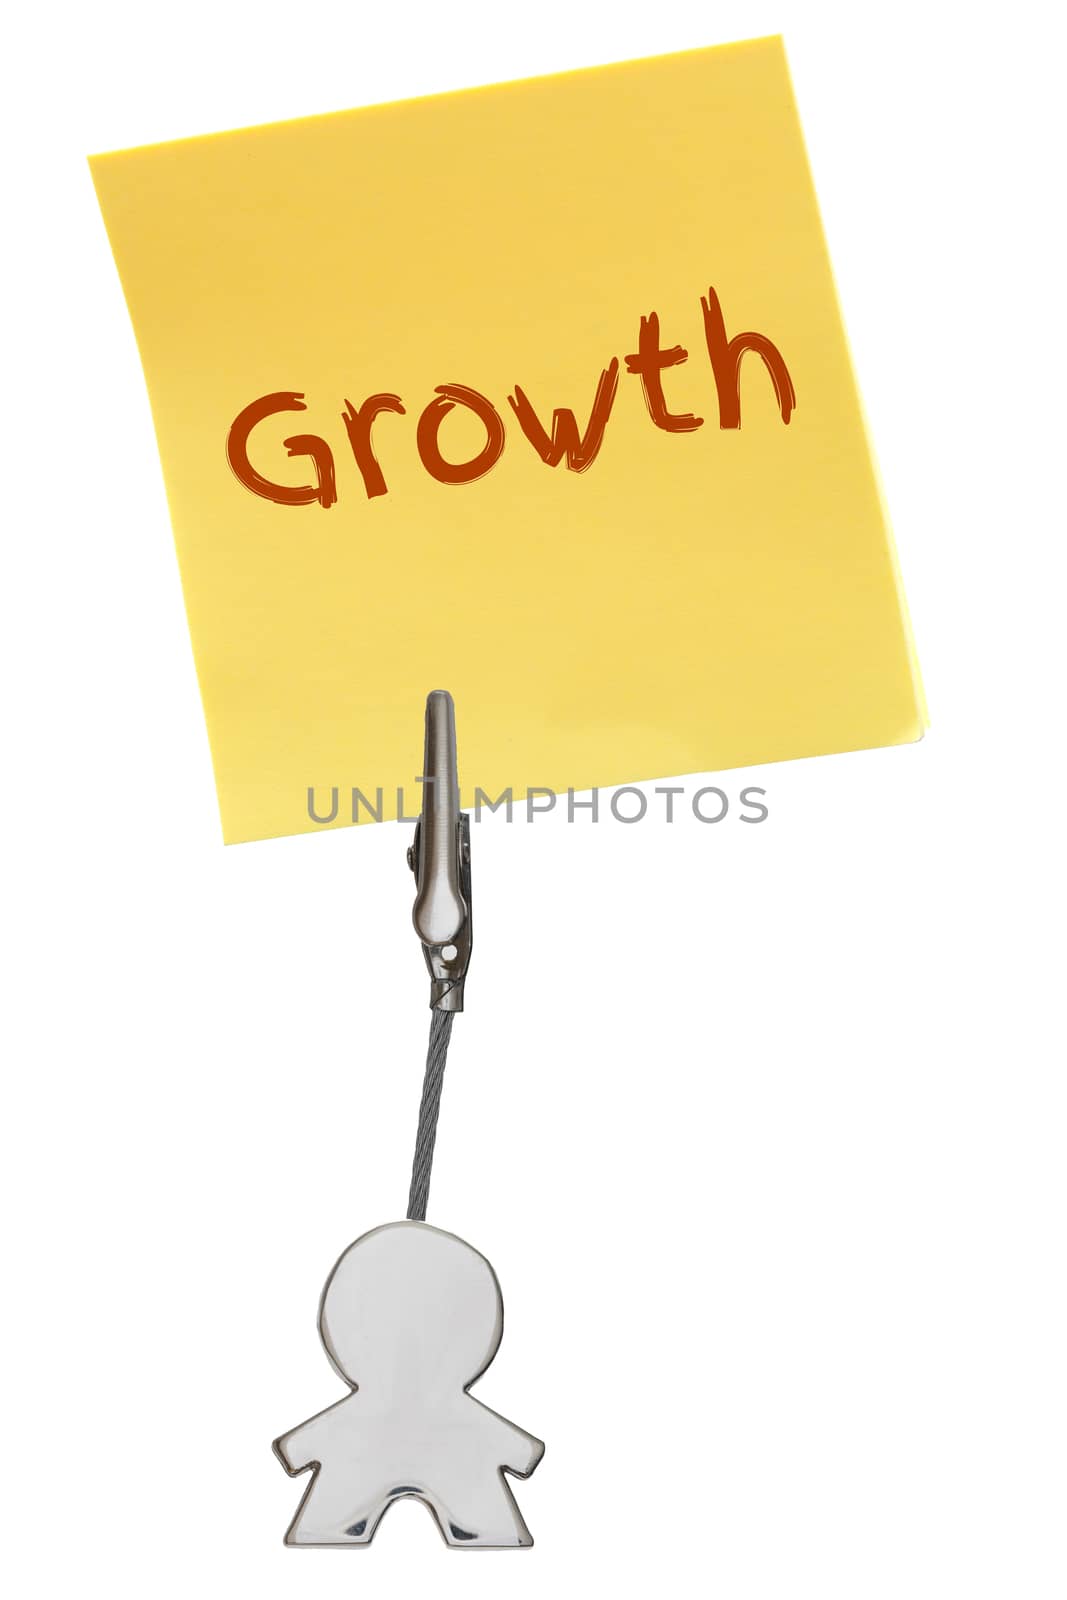 Man Figure Business Card Holder with yellow paper note GROWTH by asafaric